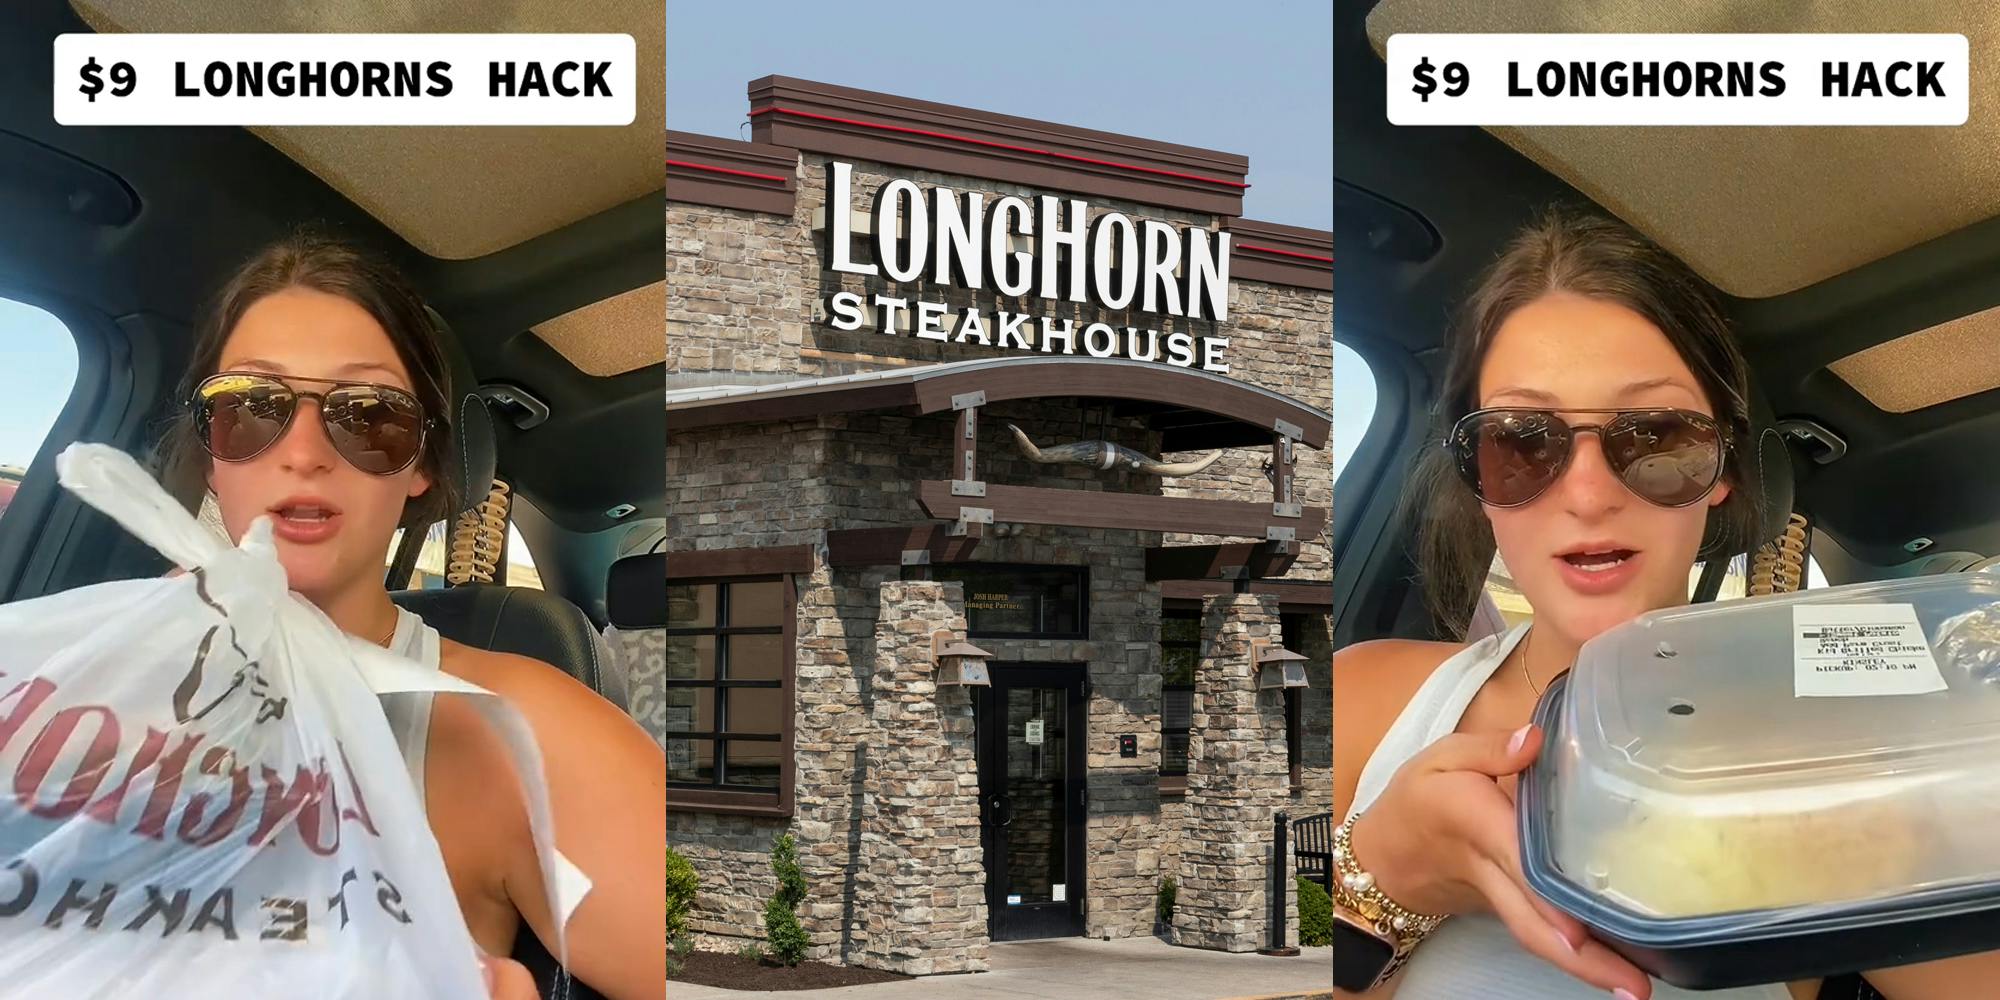 Longhorn Steakhouse customer speaking in car while holding meal with caption "$9 LONGHORNS HACK" (l) Longhorn Steakhouse building with sign (c) Longhorn Steakhouse customer speaking in car while holding meal with caption "$9 LONGHORNS HACK" (r)